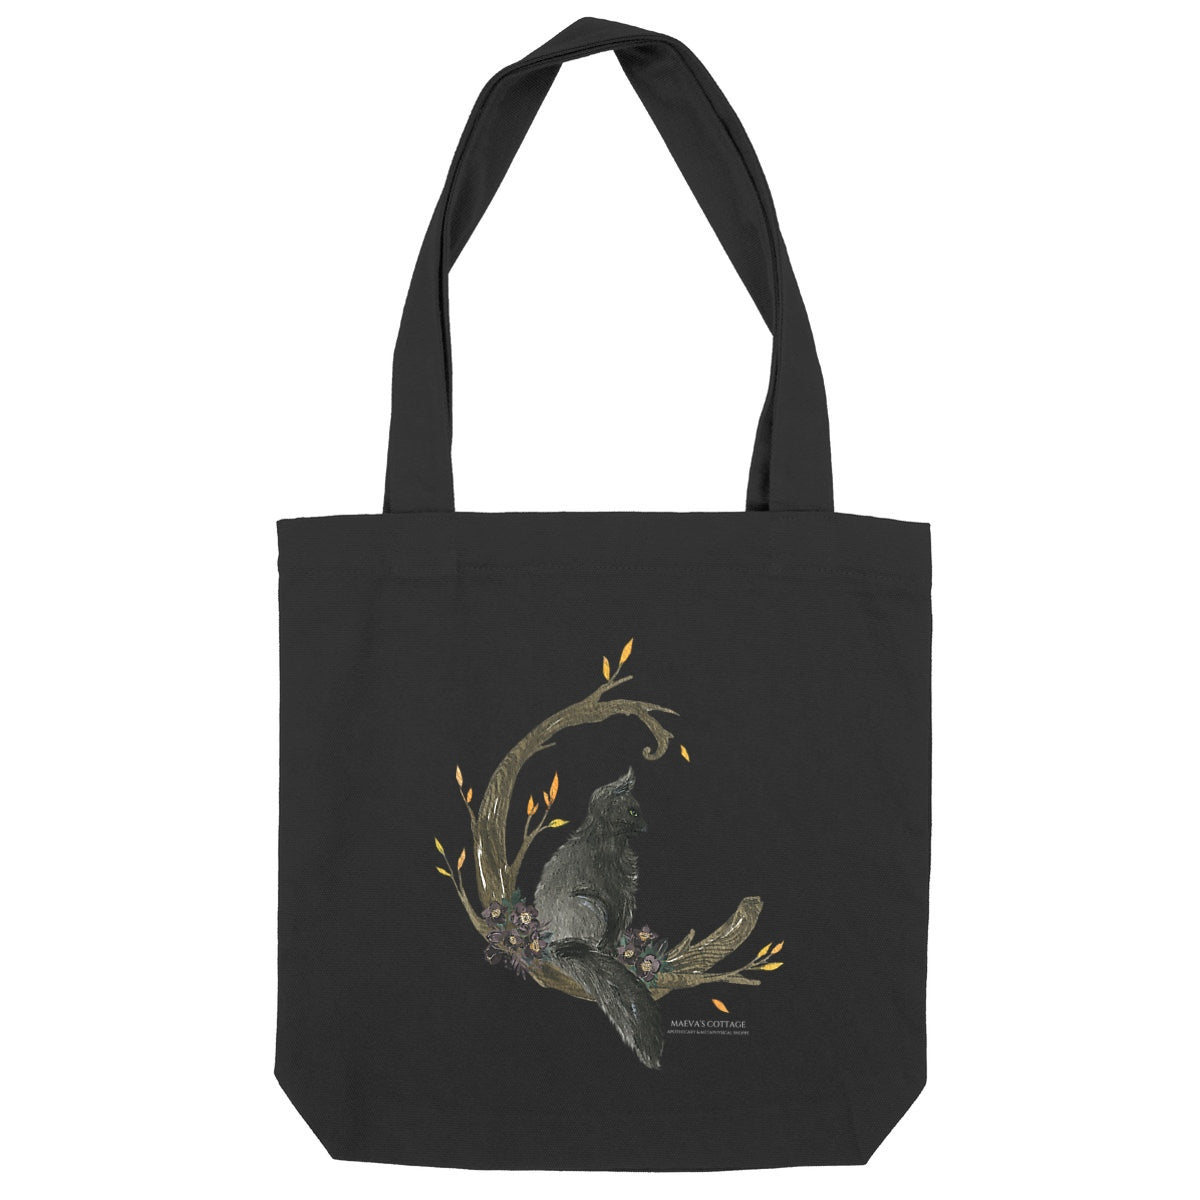 Maeva's Cottage - Cat Familiar - Recycled Heavyweight Totebag